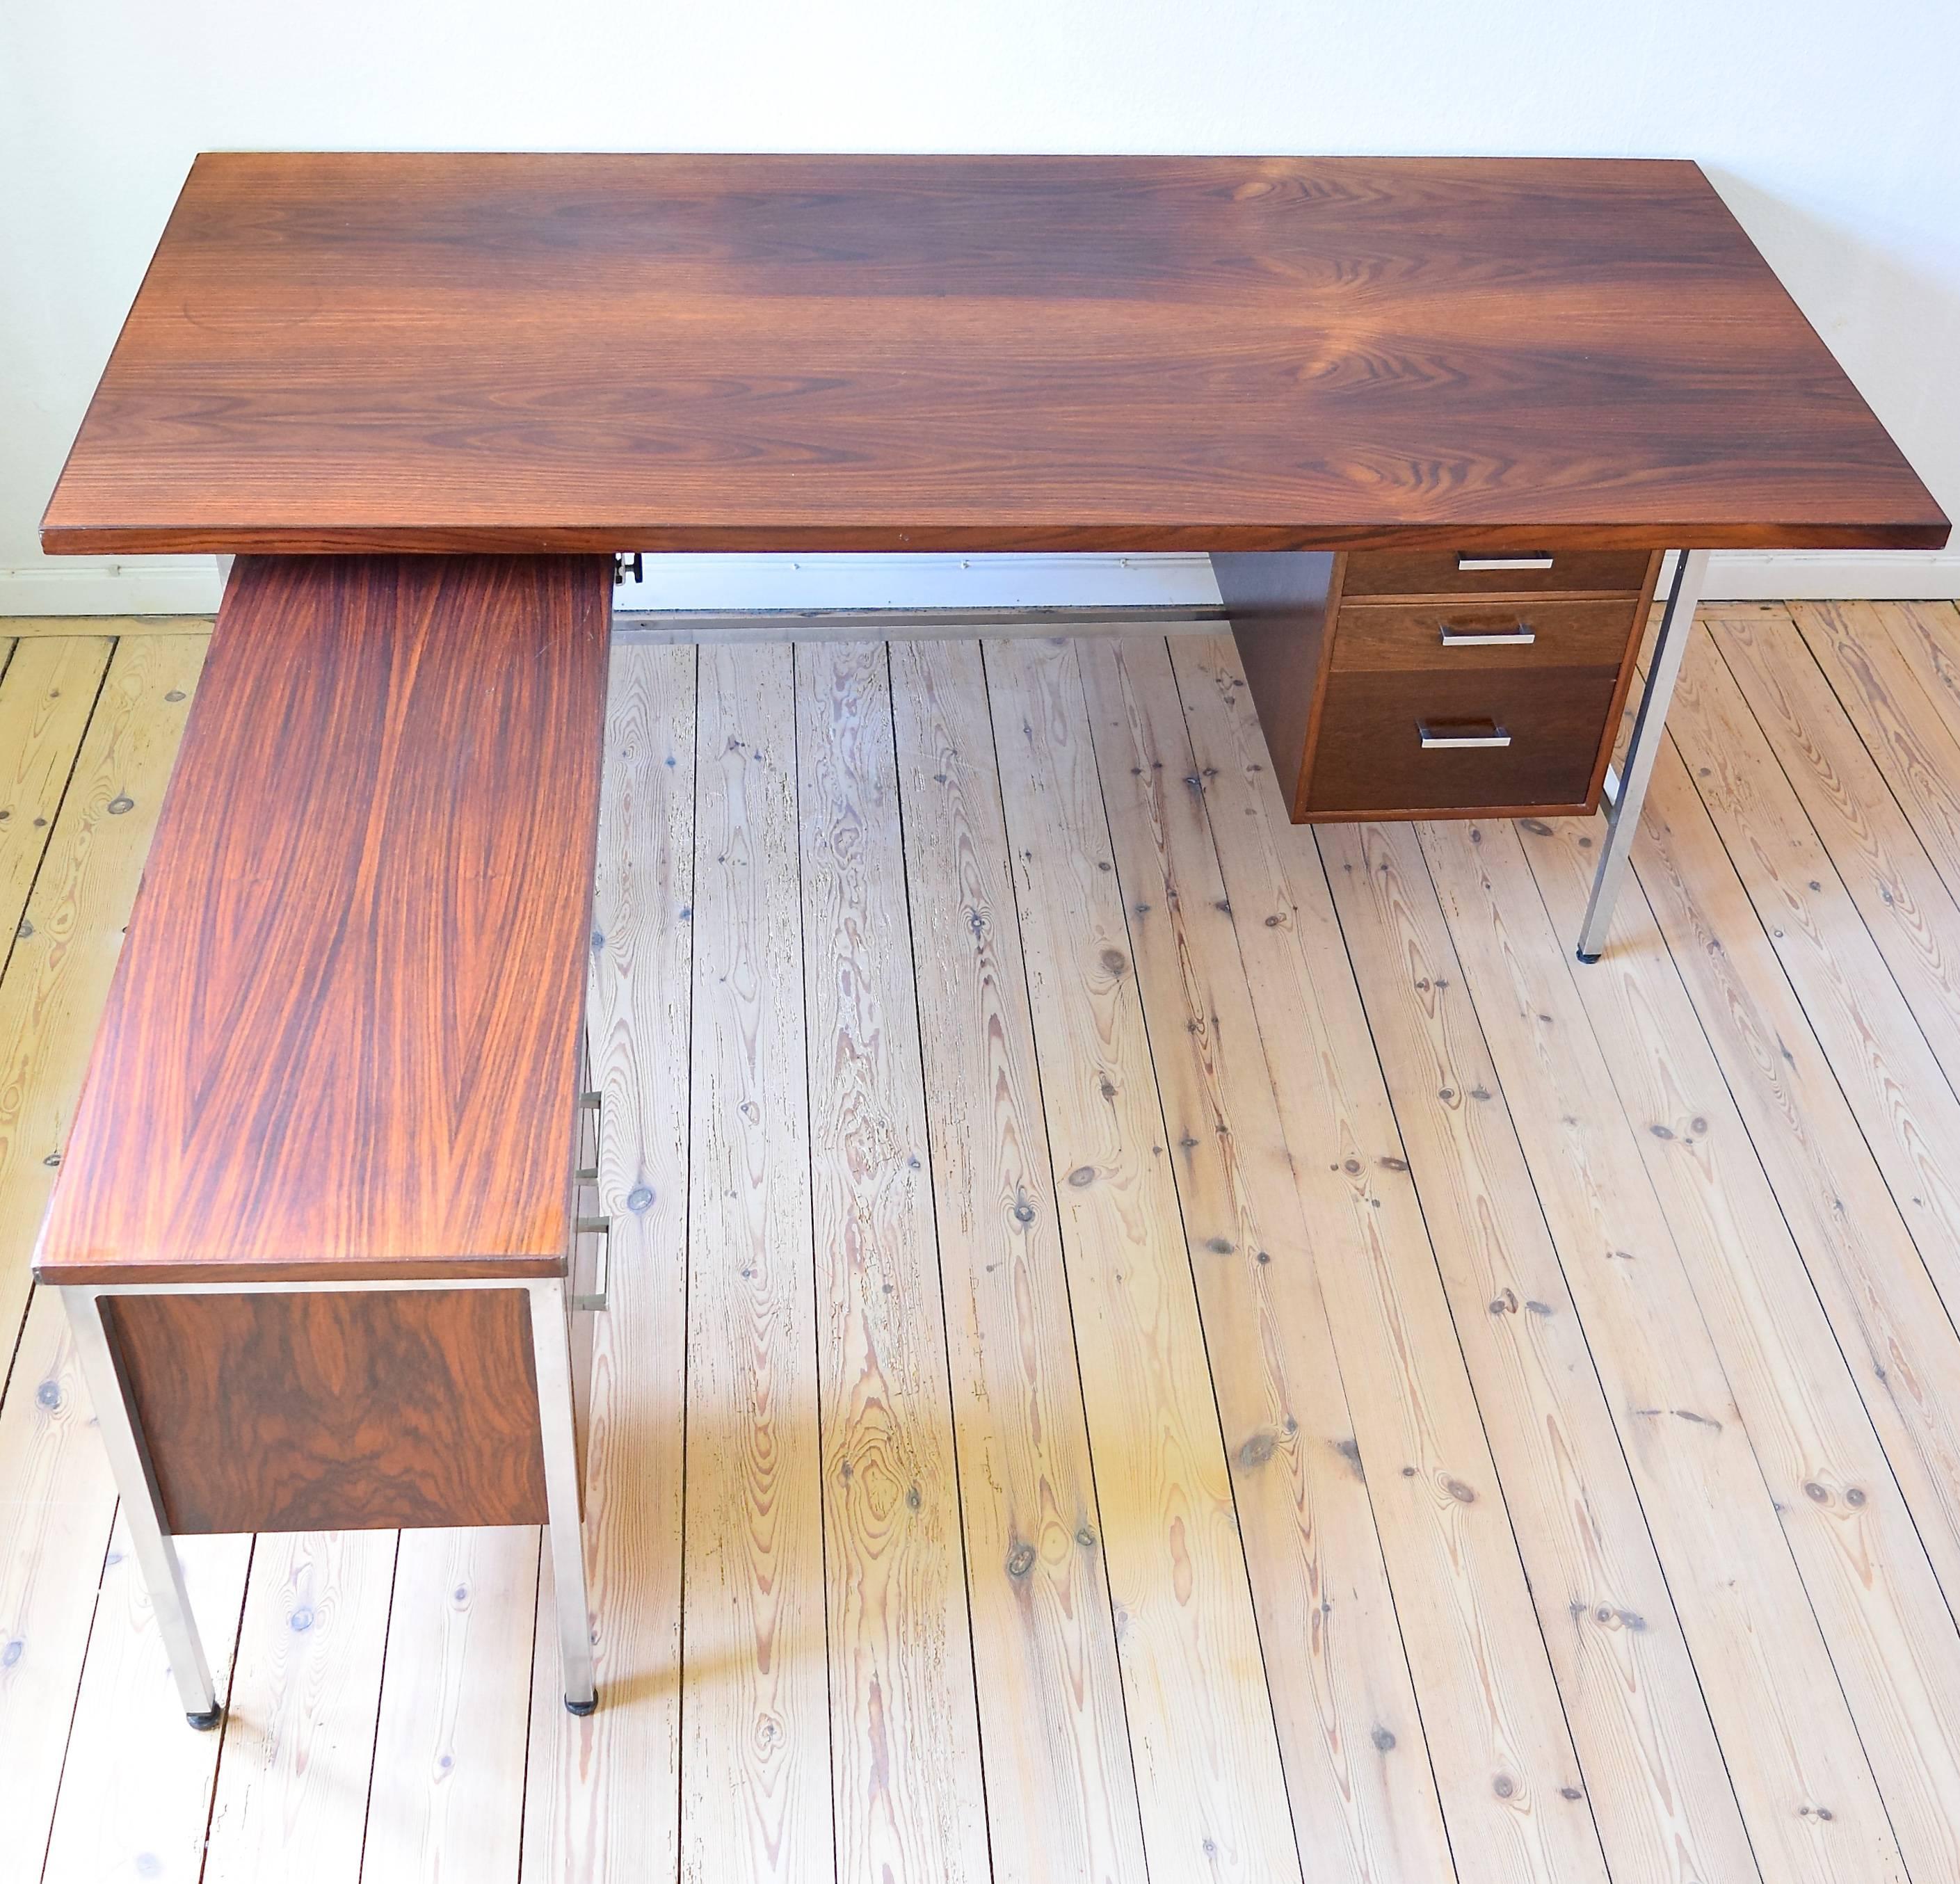 Executive chrome and rosewood desk from the 1960s. This item features two sections, one with two drawers, the other with three. The shorter end can be moved to sit at the opposite side of the desk. Deep rosewood grain throughout the two top-plates.